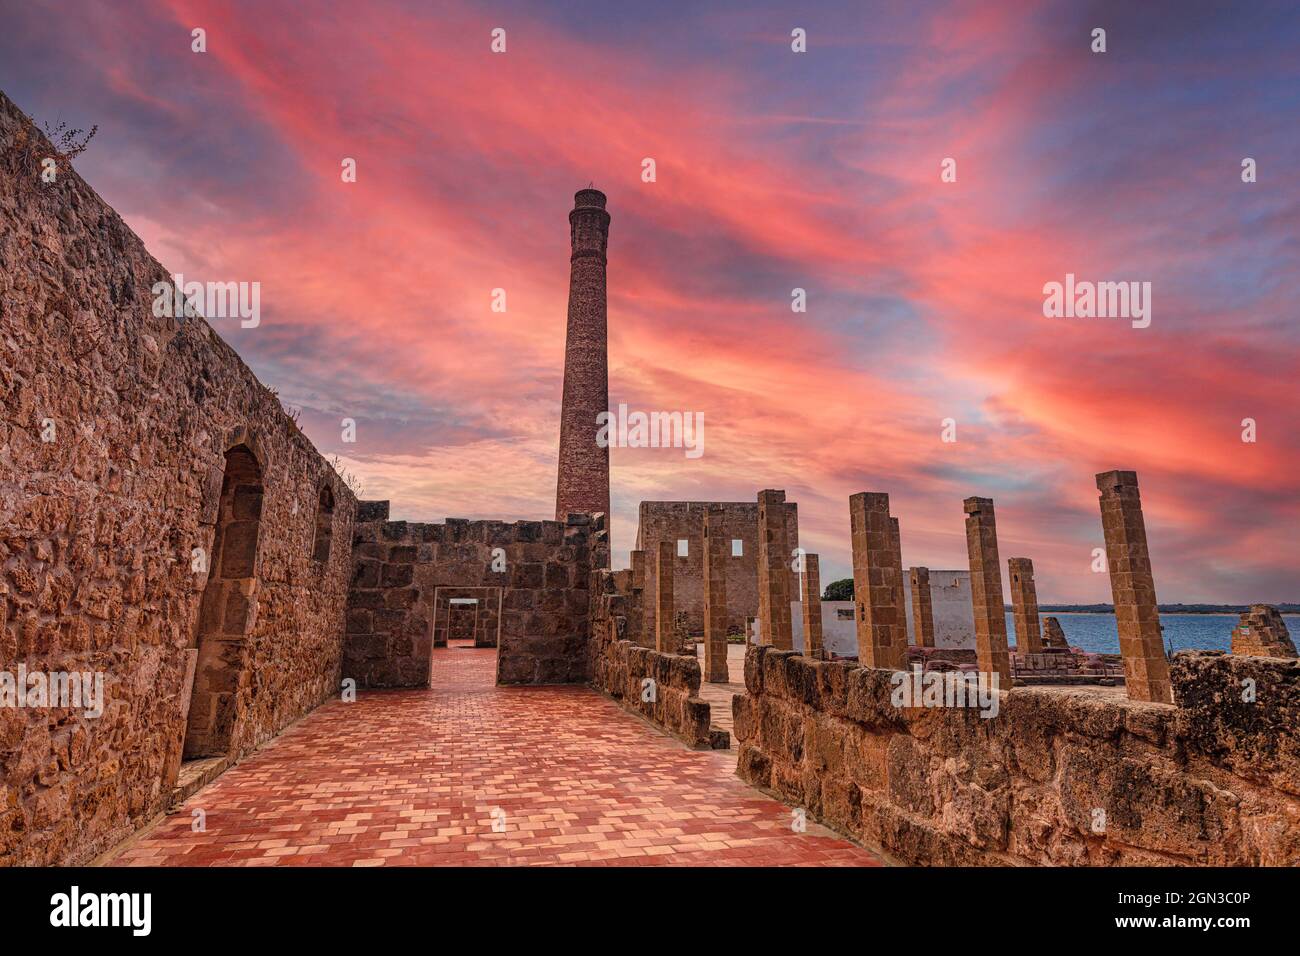 remains of the tonnara in the locality of Vendicari in Sicily. Stock Photo